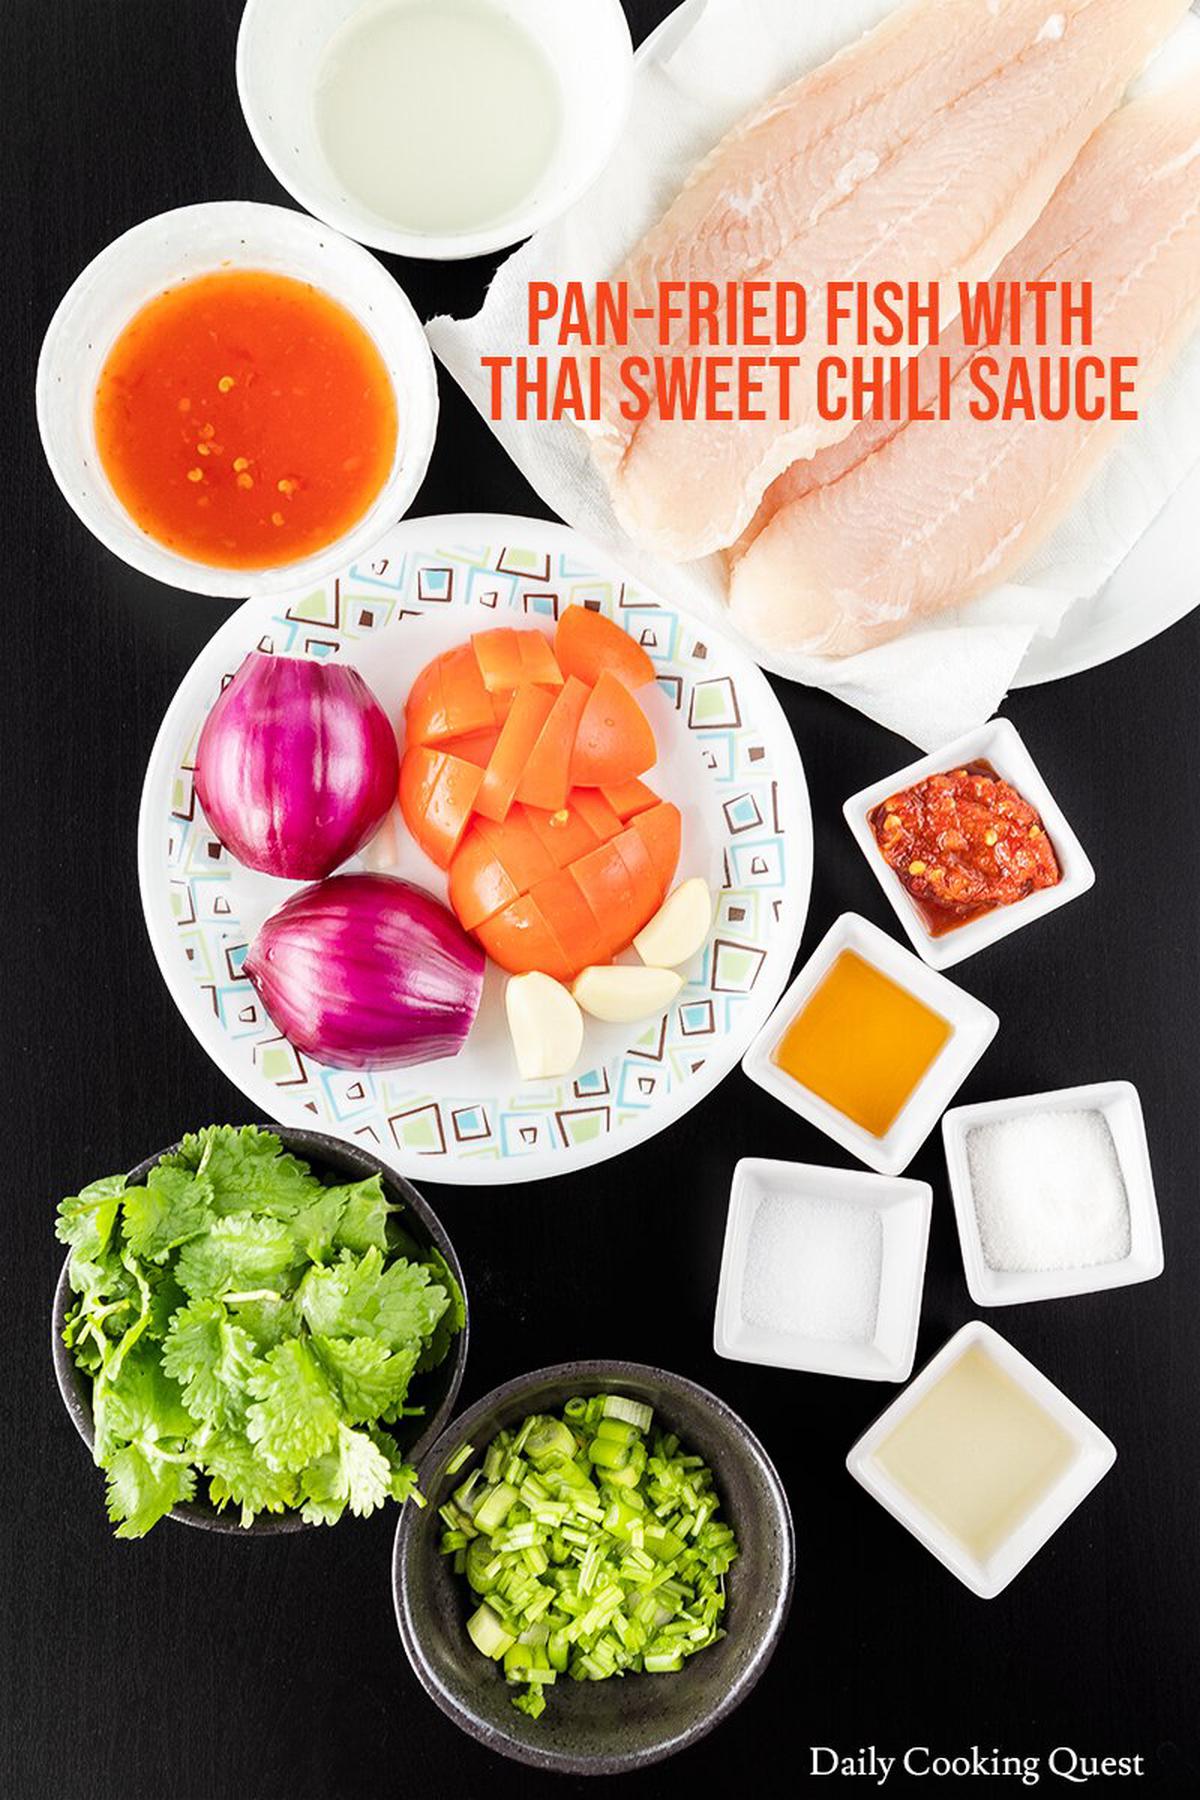 Ingredients for Pan-Fried Fish with Thai Sweet Chili Sauce